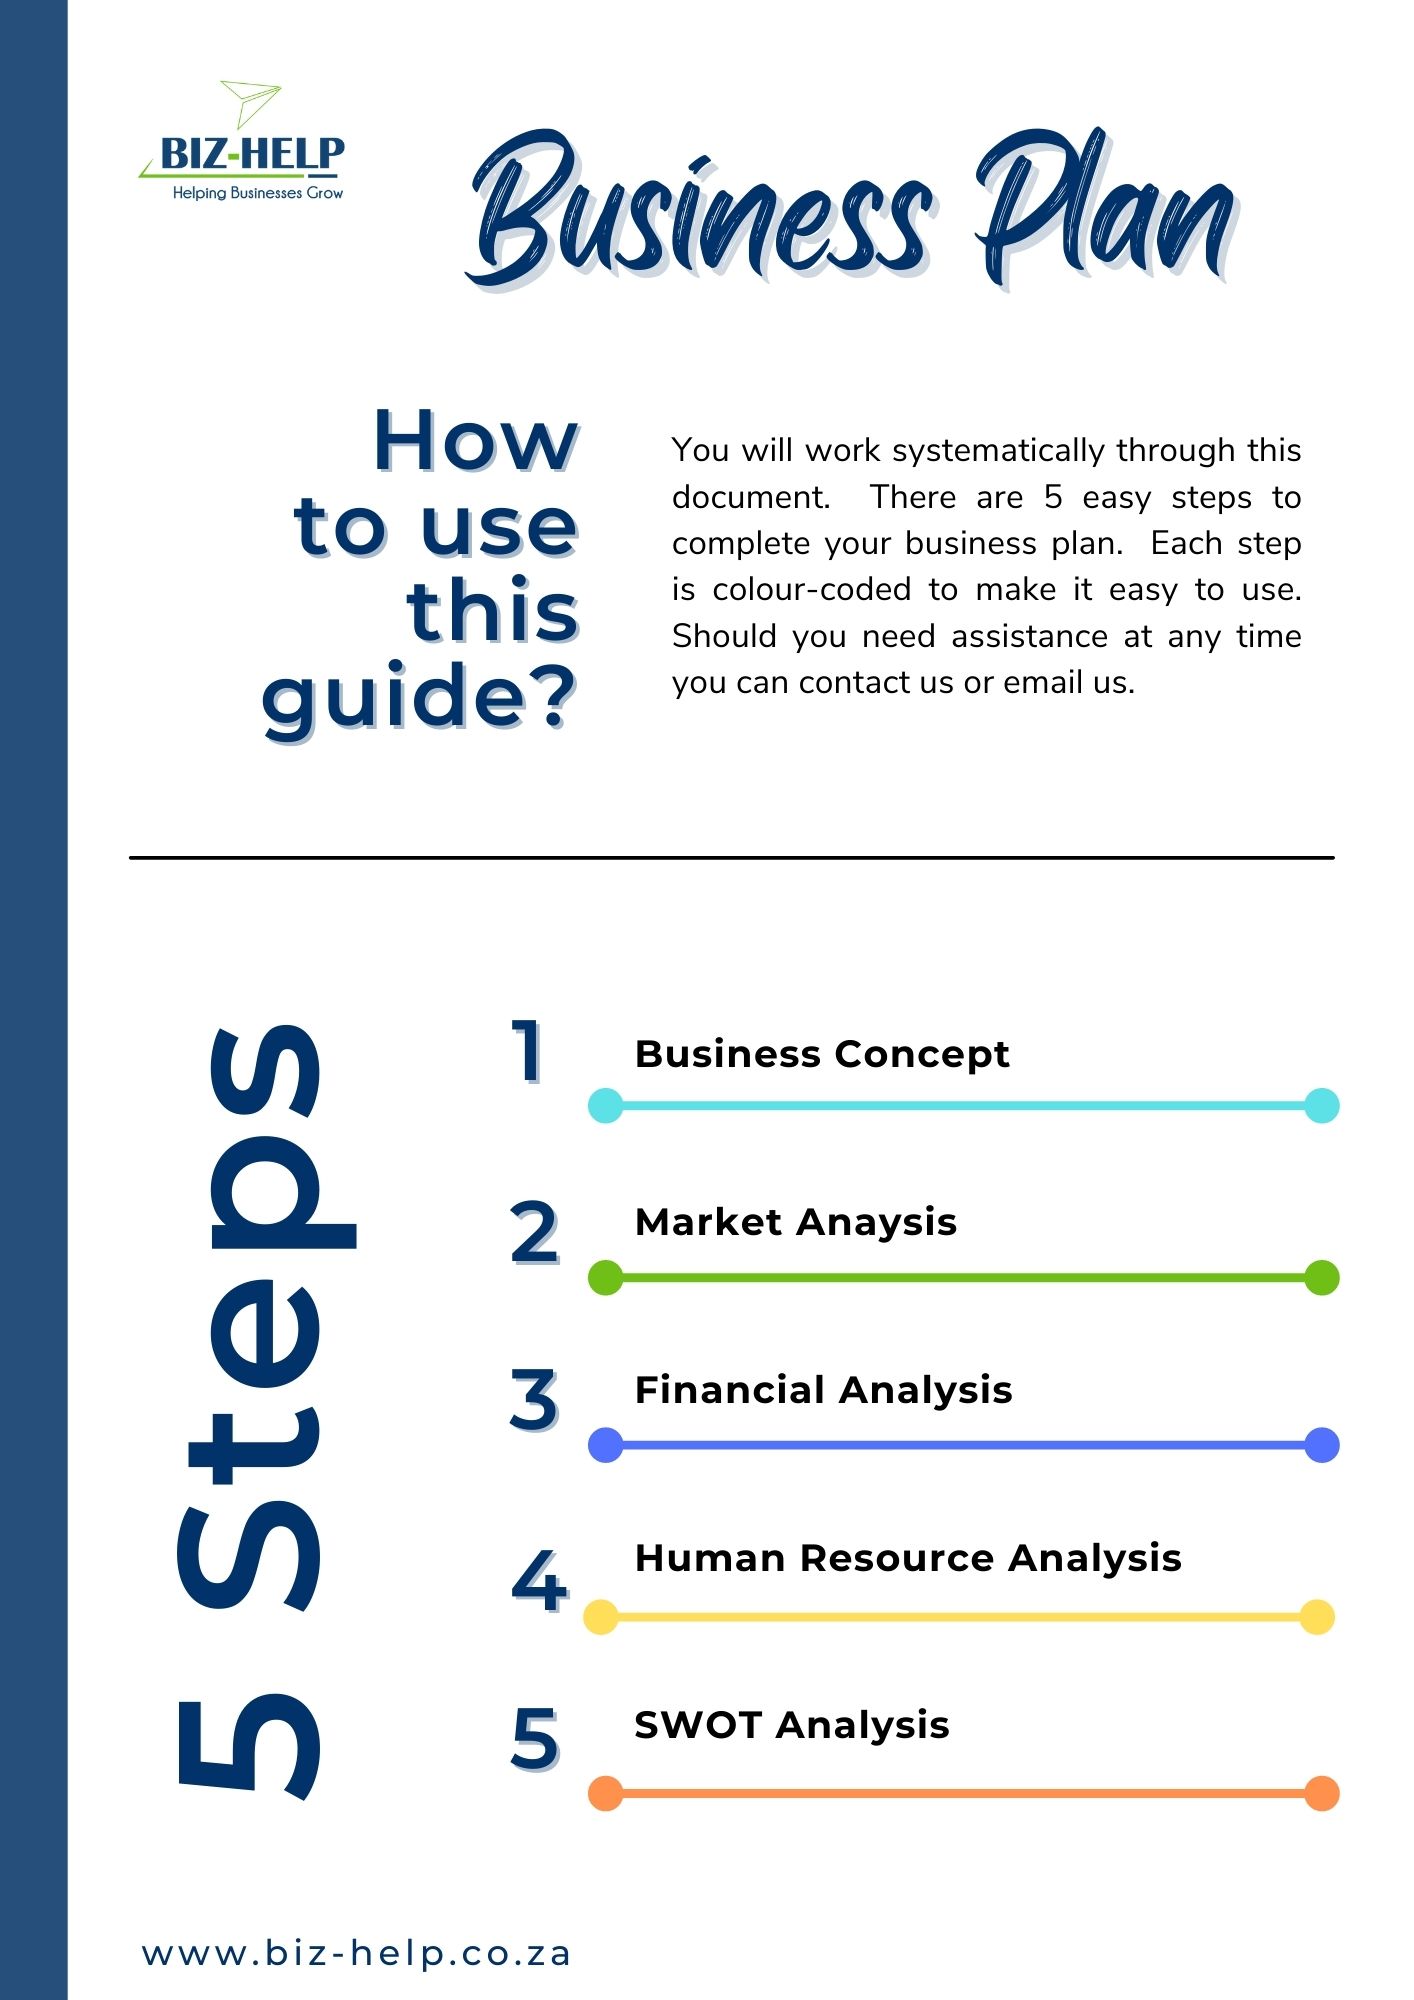 business plan guide for small business